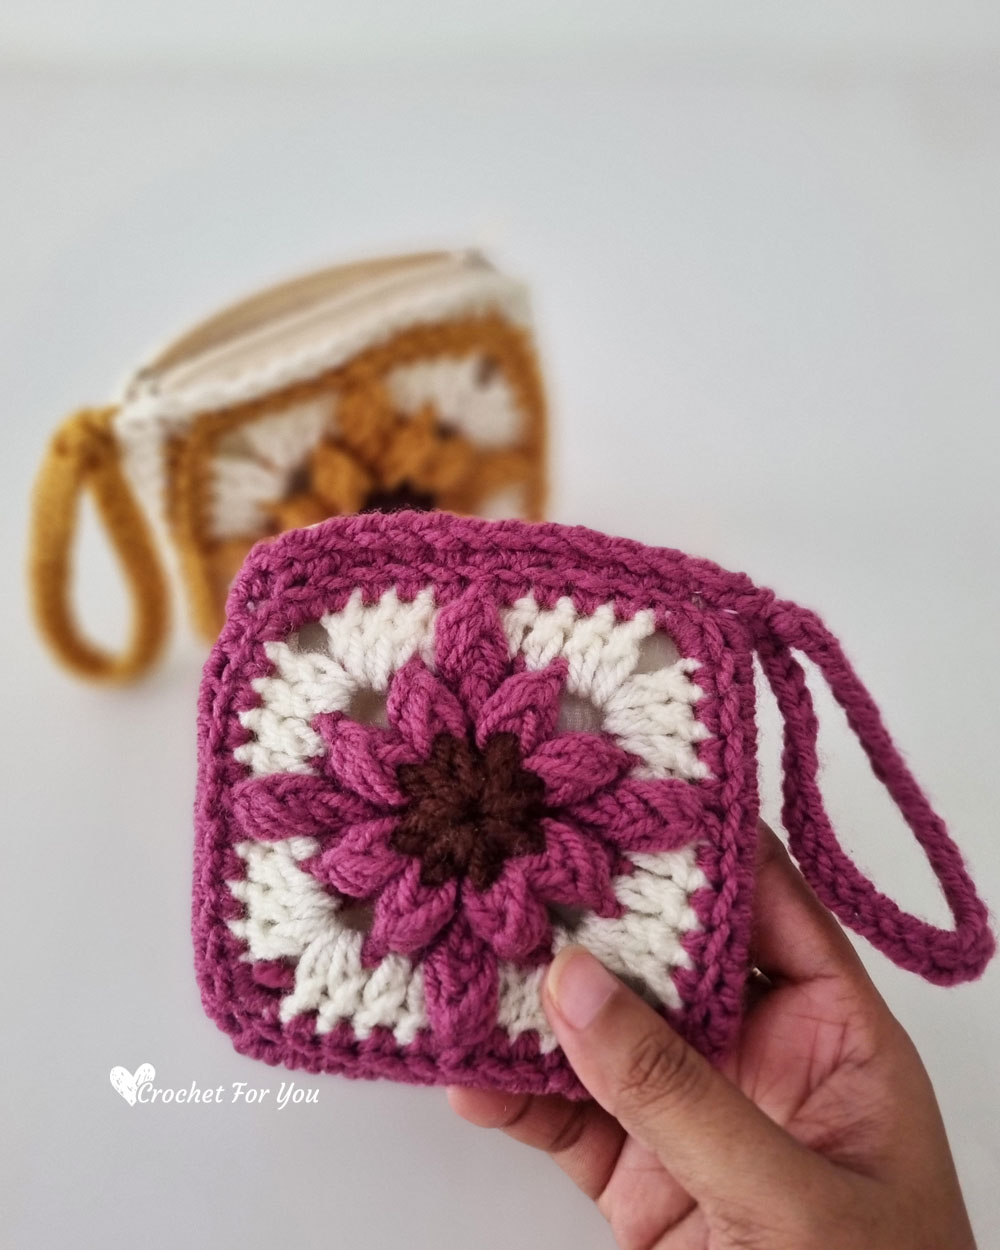 How to Line a Macrame or Crochet Bag (By Hand!) | Marching North